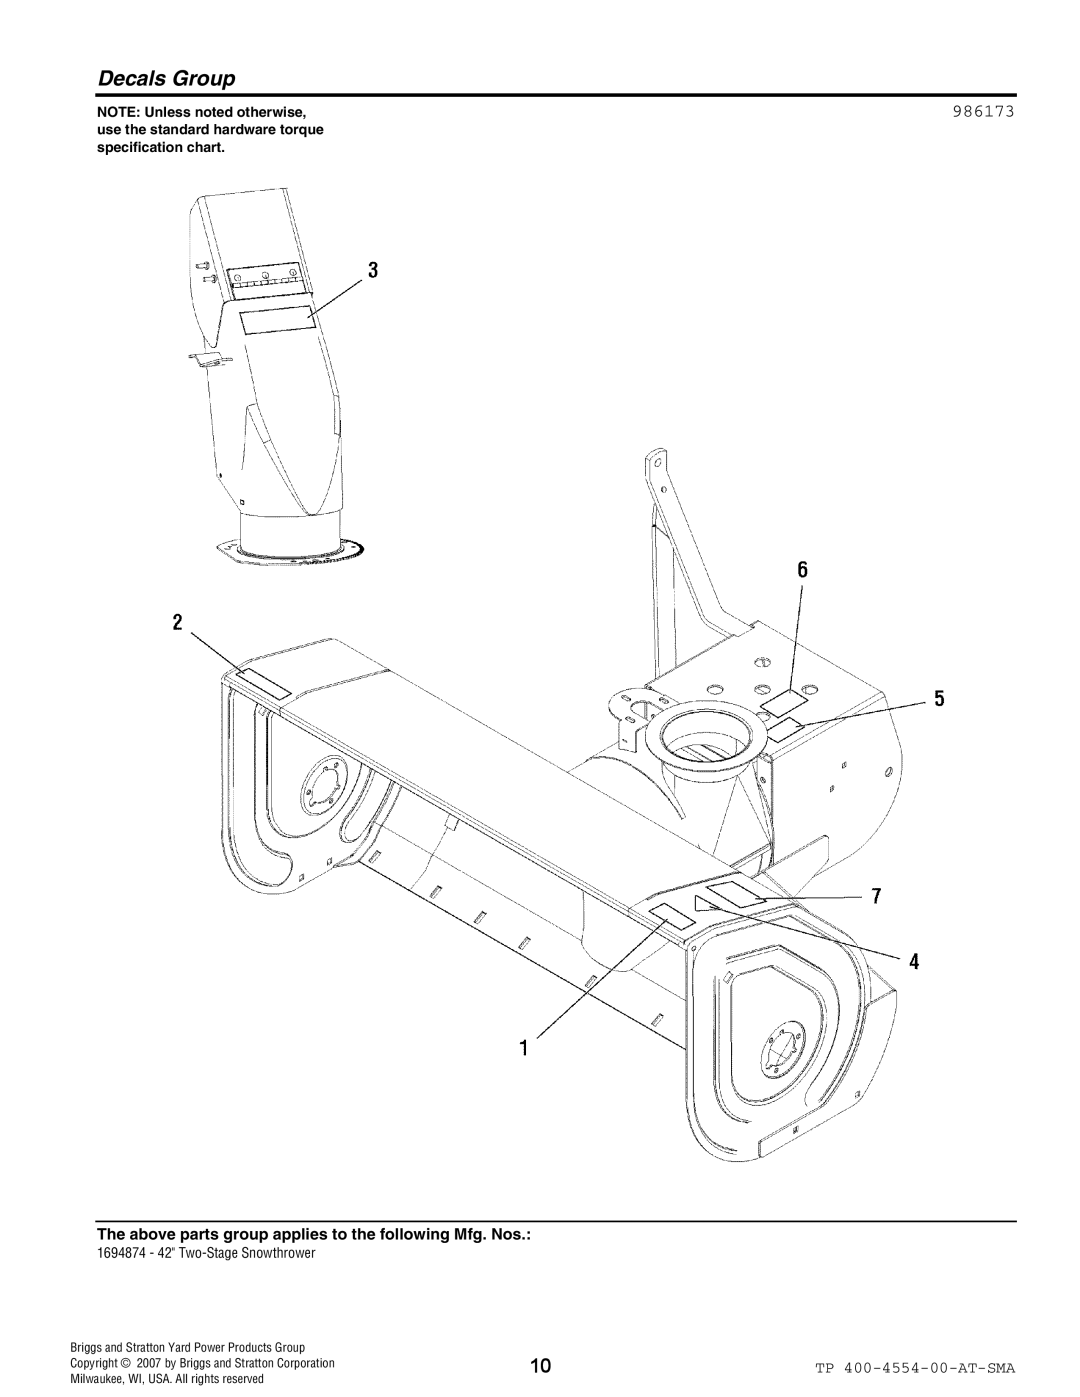 Simplicity 1694874 manual Decals Group, 986173, NOTE Unless noted otherwise, Briggs and Stratton Yard Power Products Group 